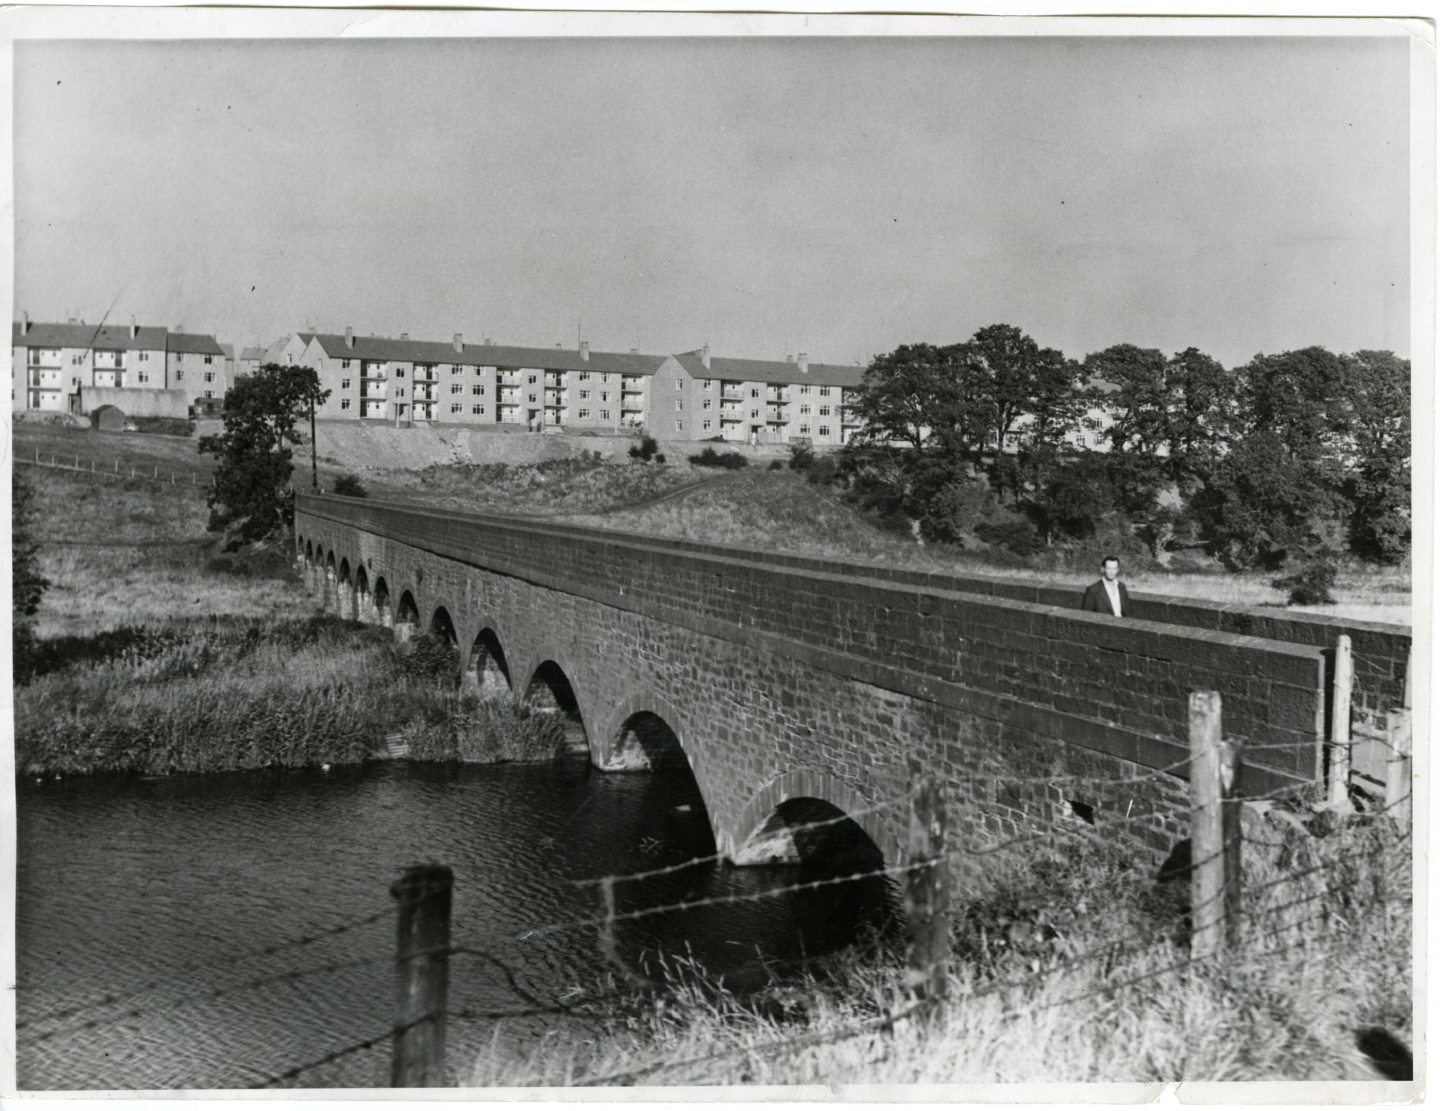 The bridge connecting Fintry and Linlathen